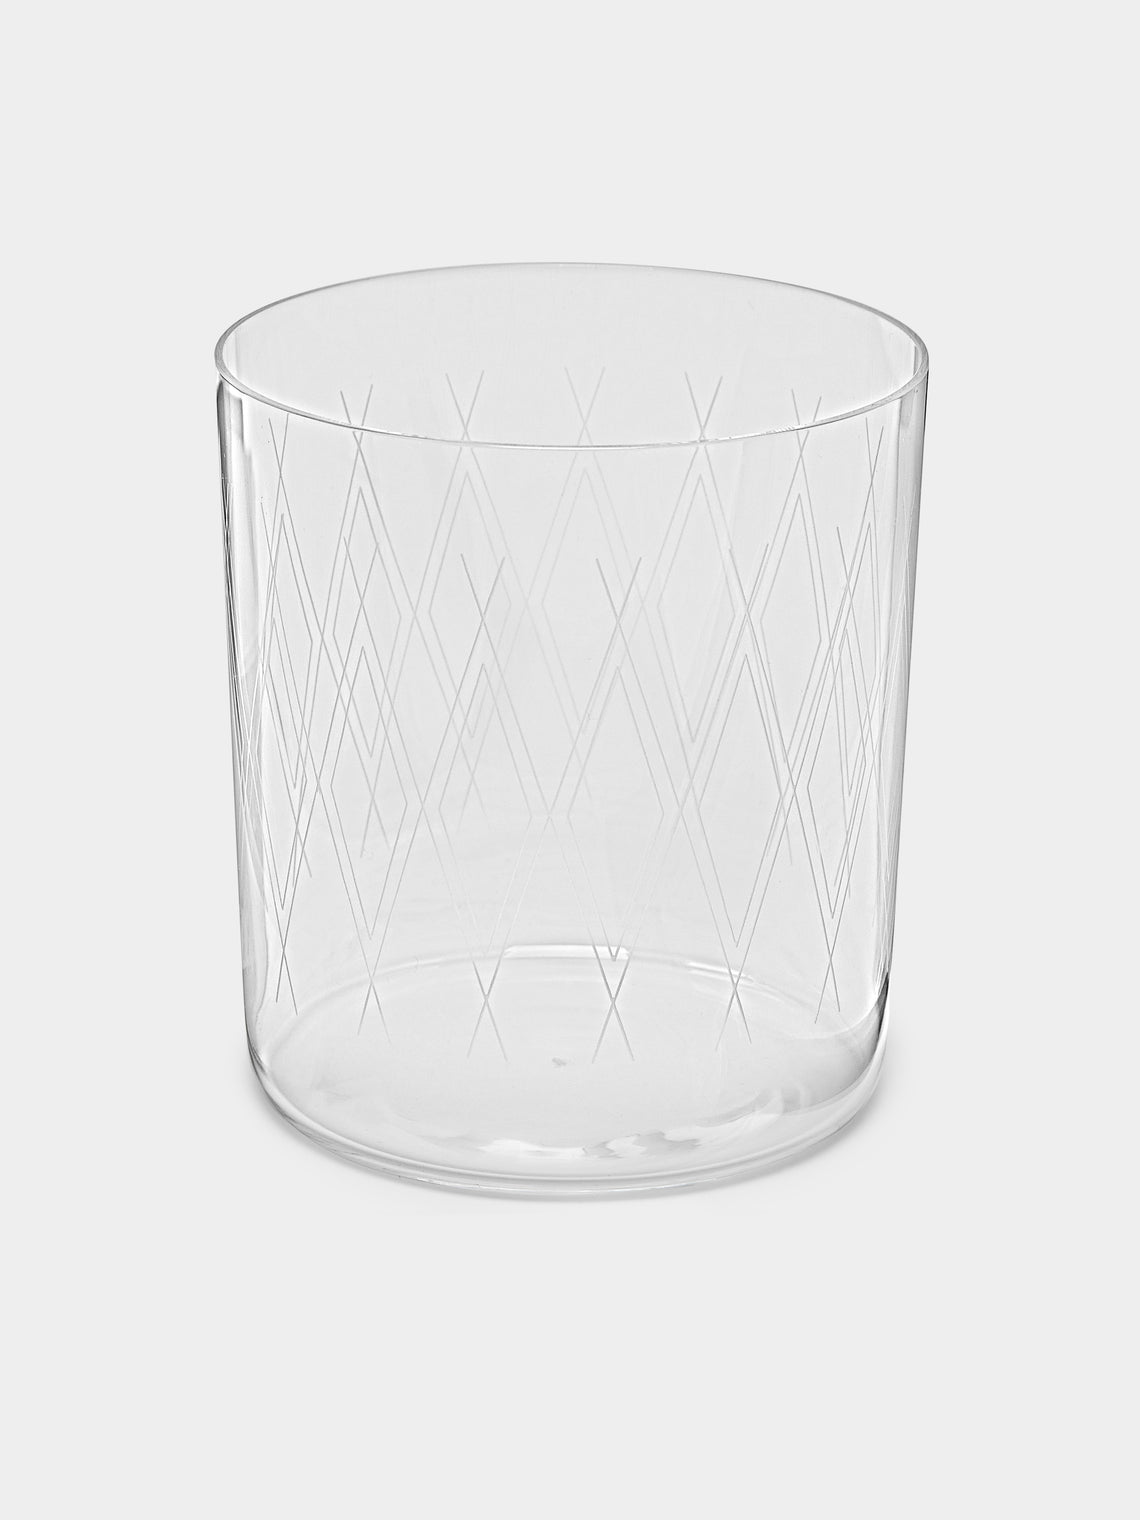 Lobmeyr - Neo Series VI Hand-Engraved Crystal Double Old Fashioned Glass -  - ABASK - 